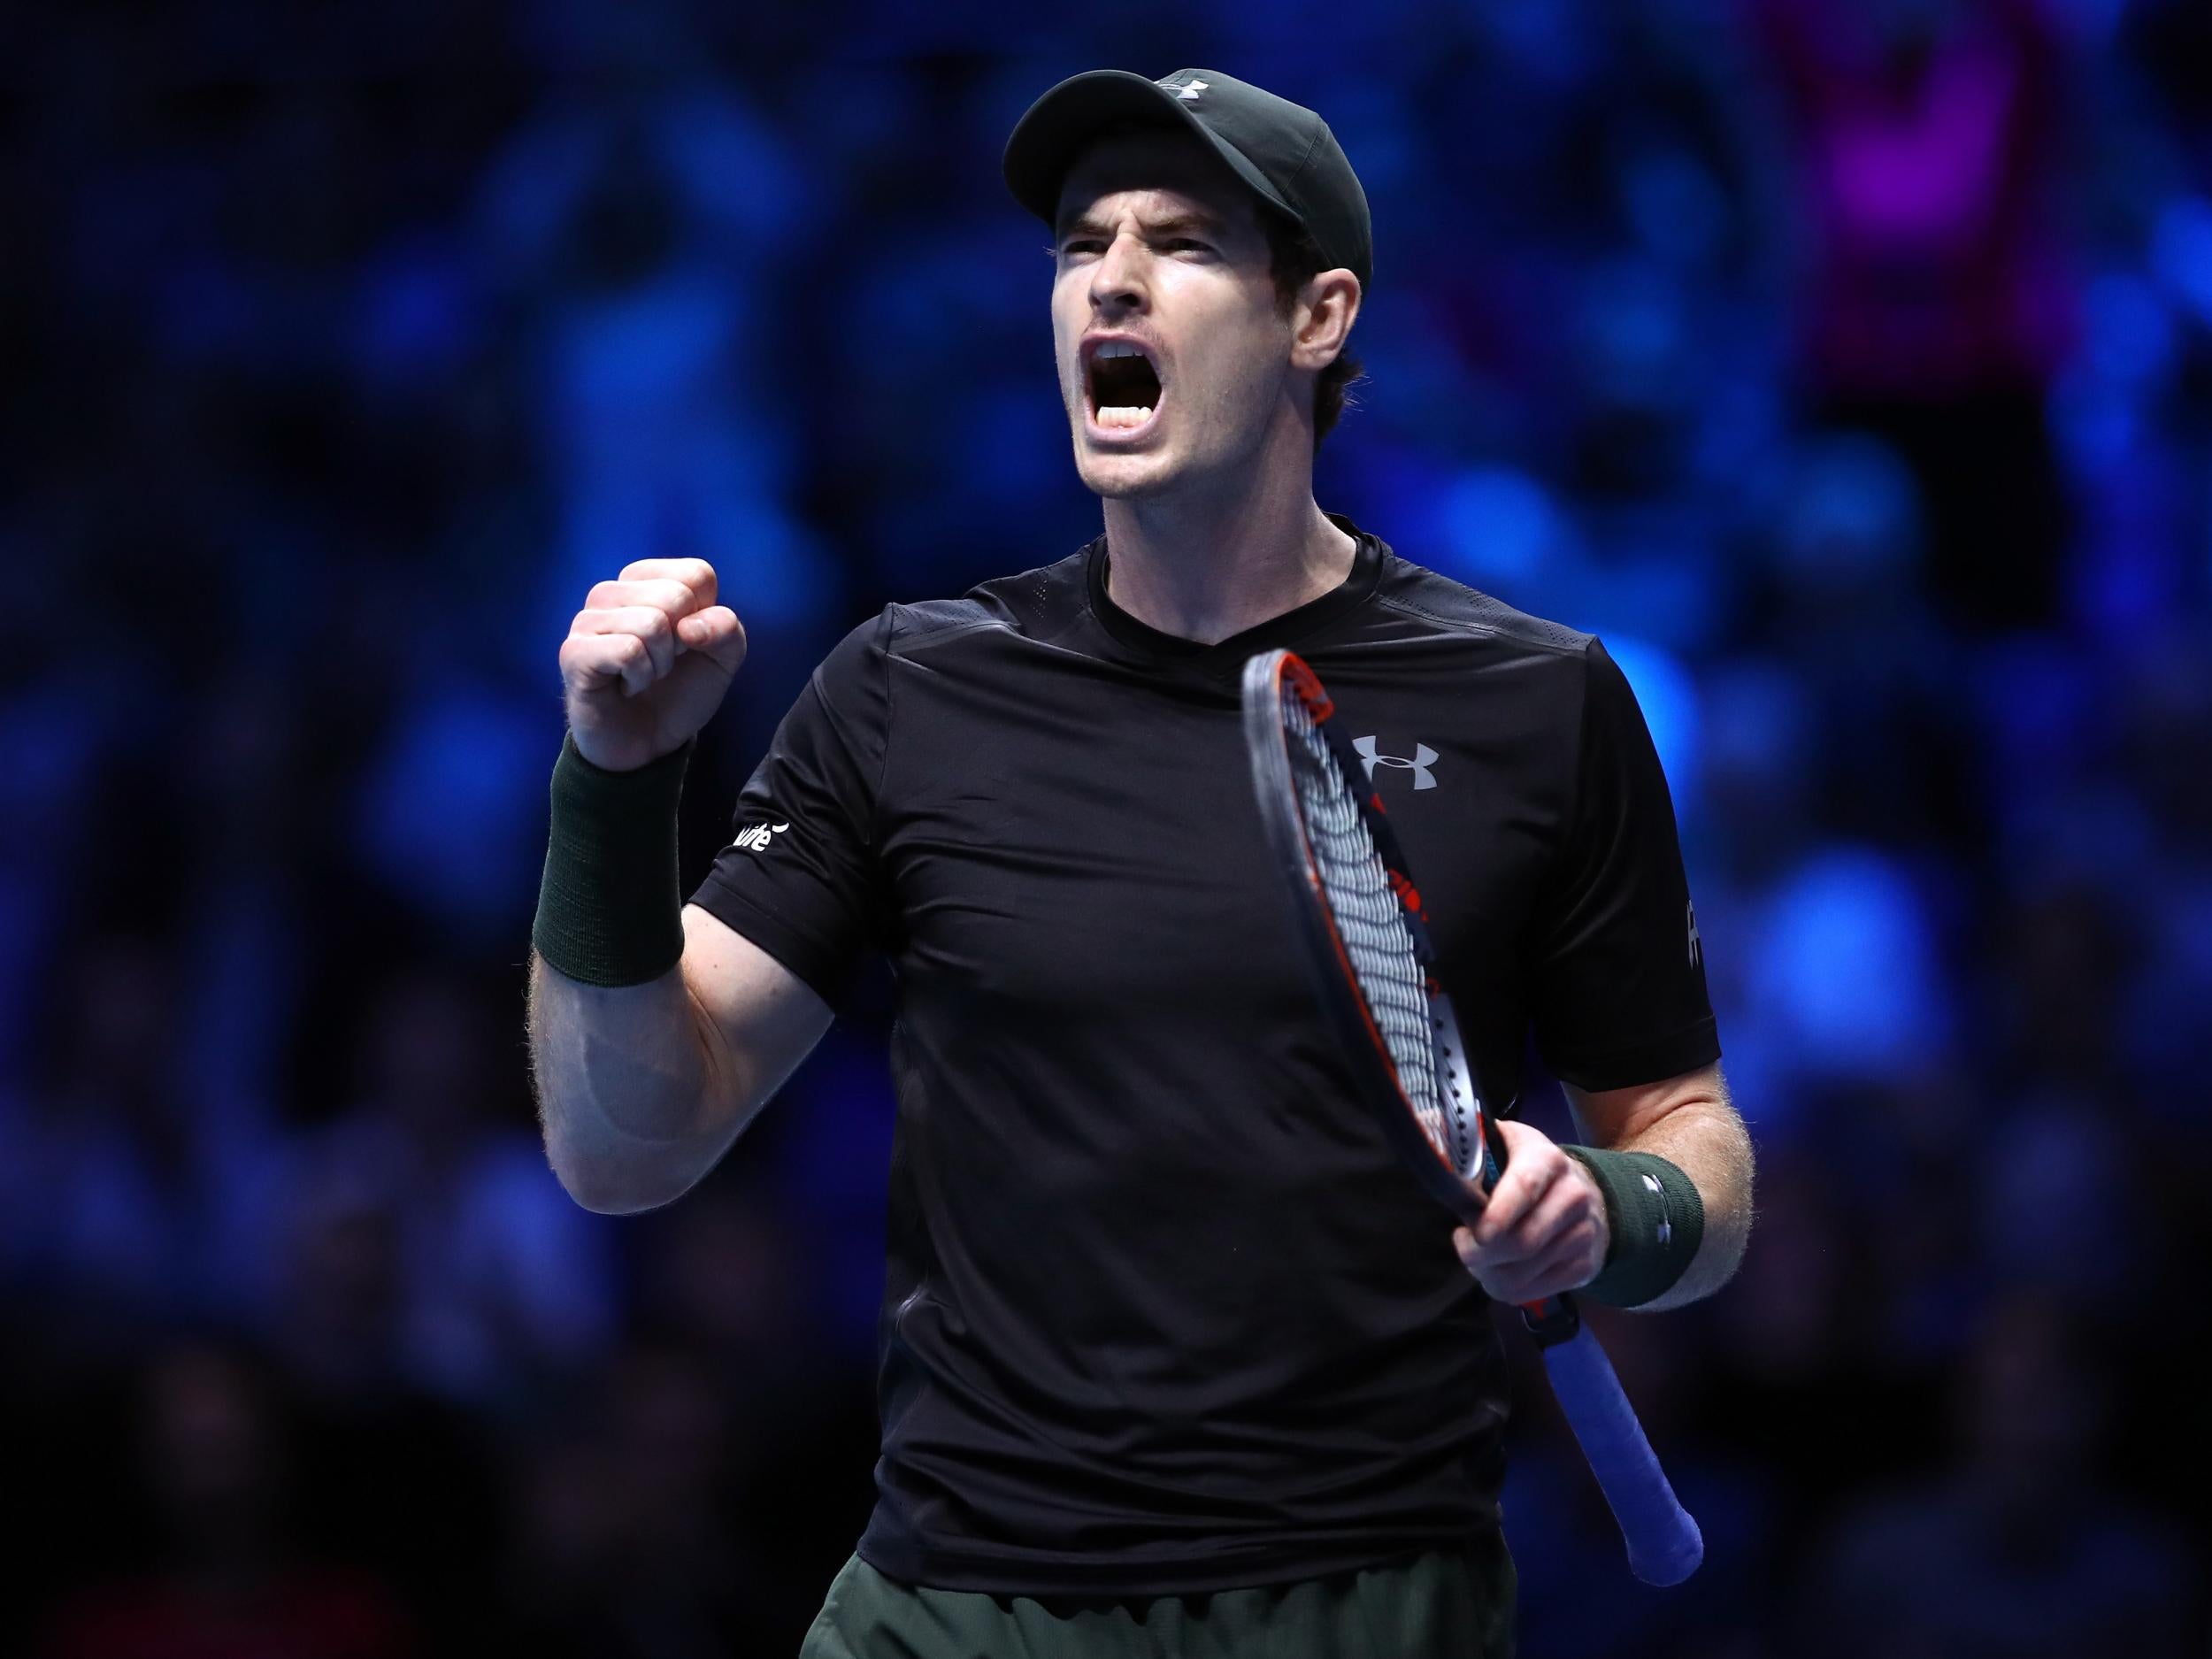 It was Murray's second match as World No 1